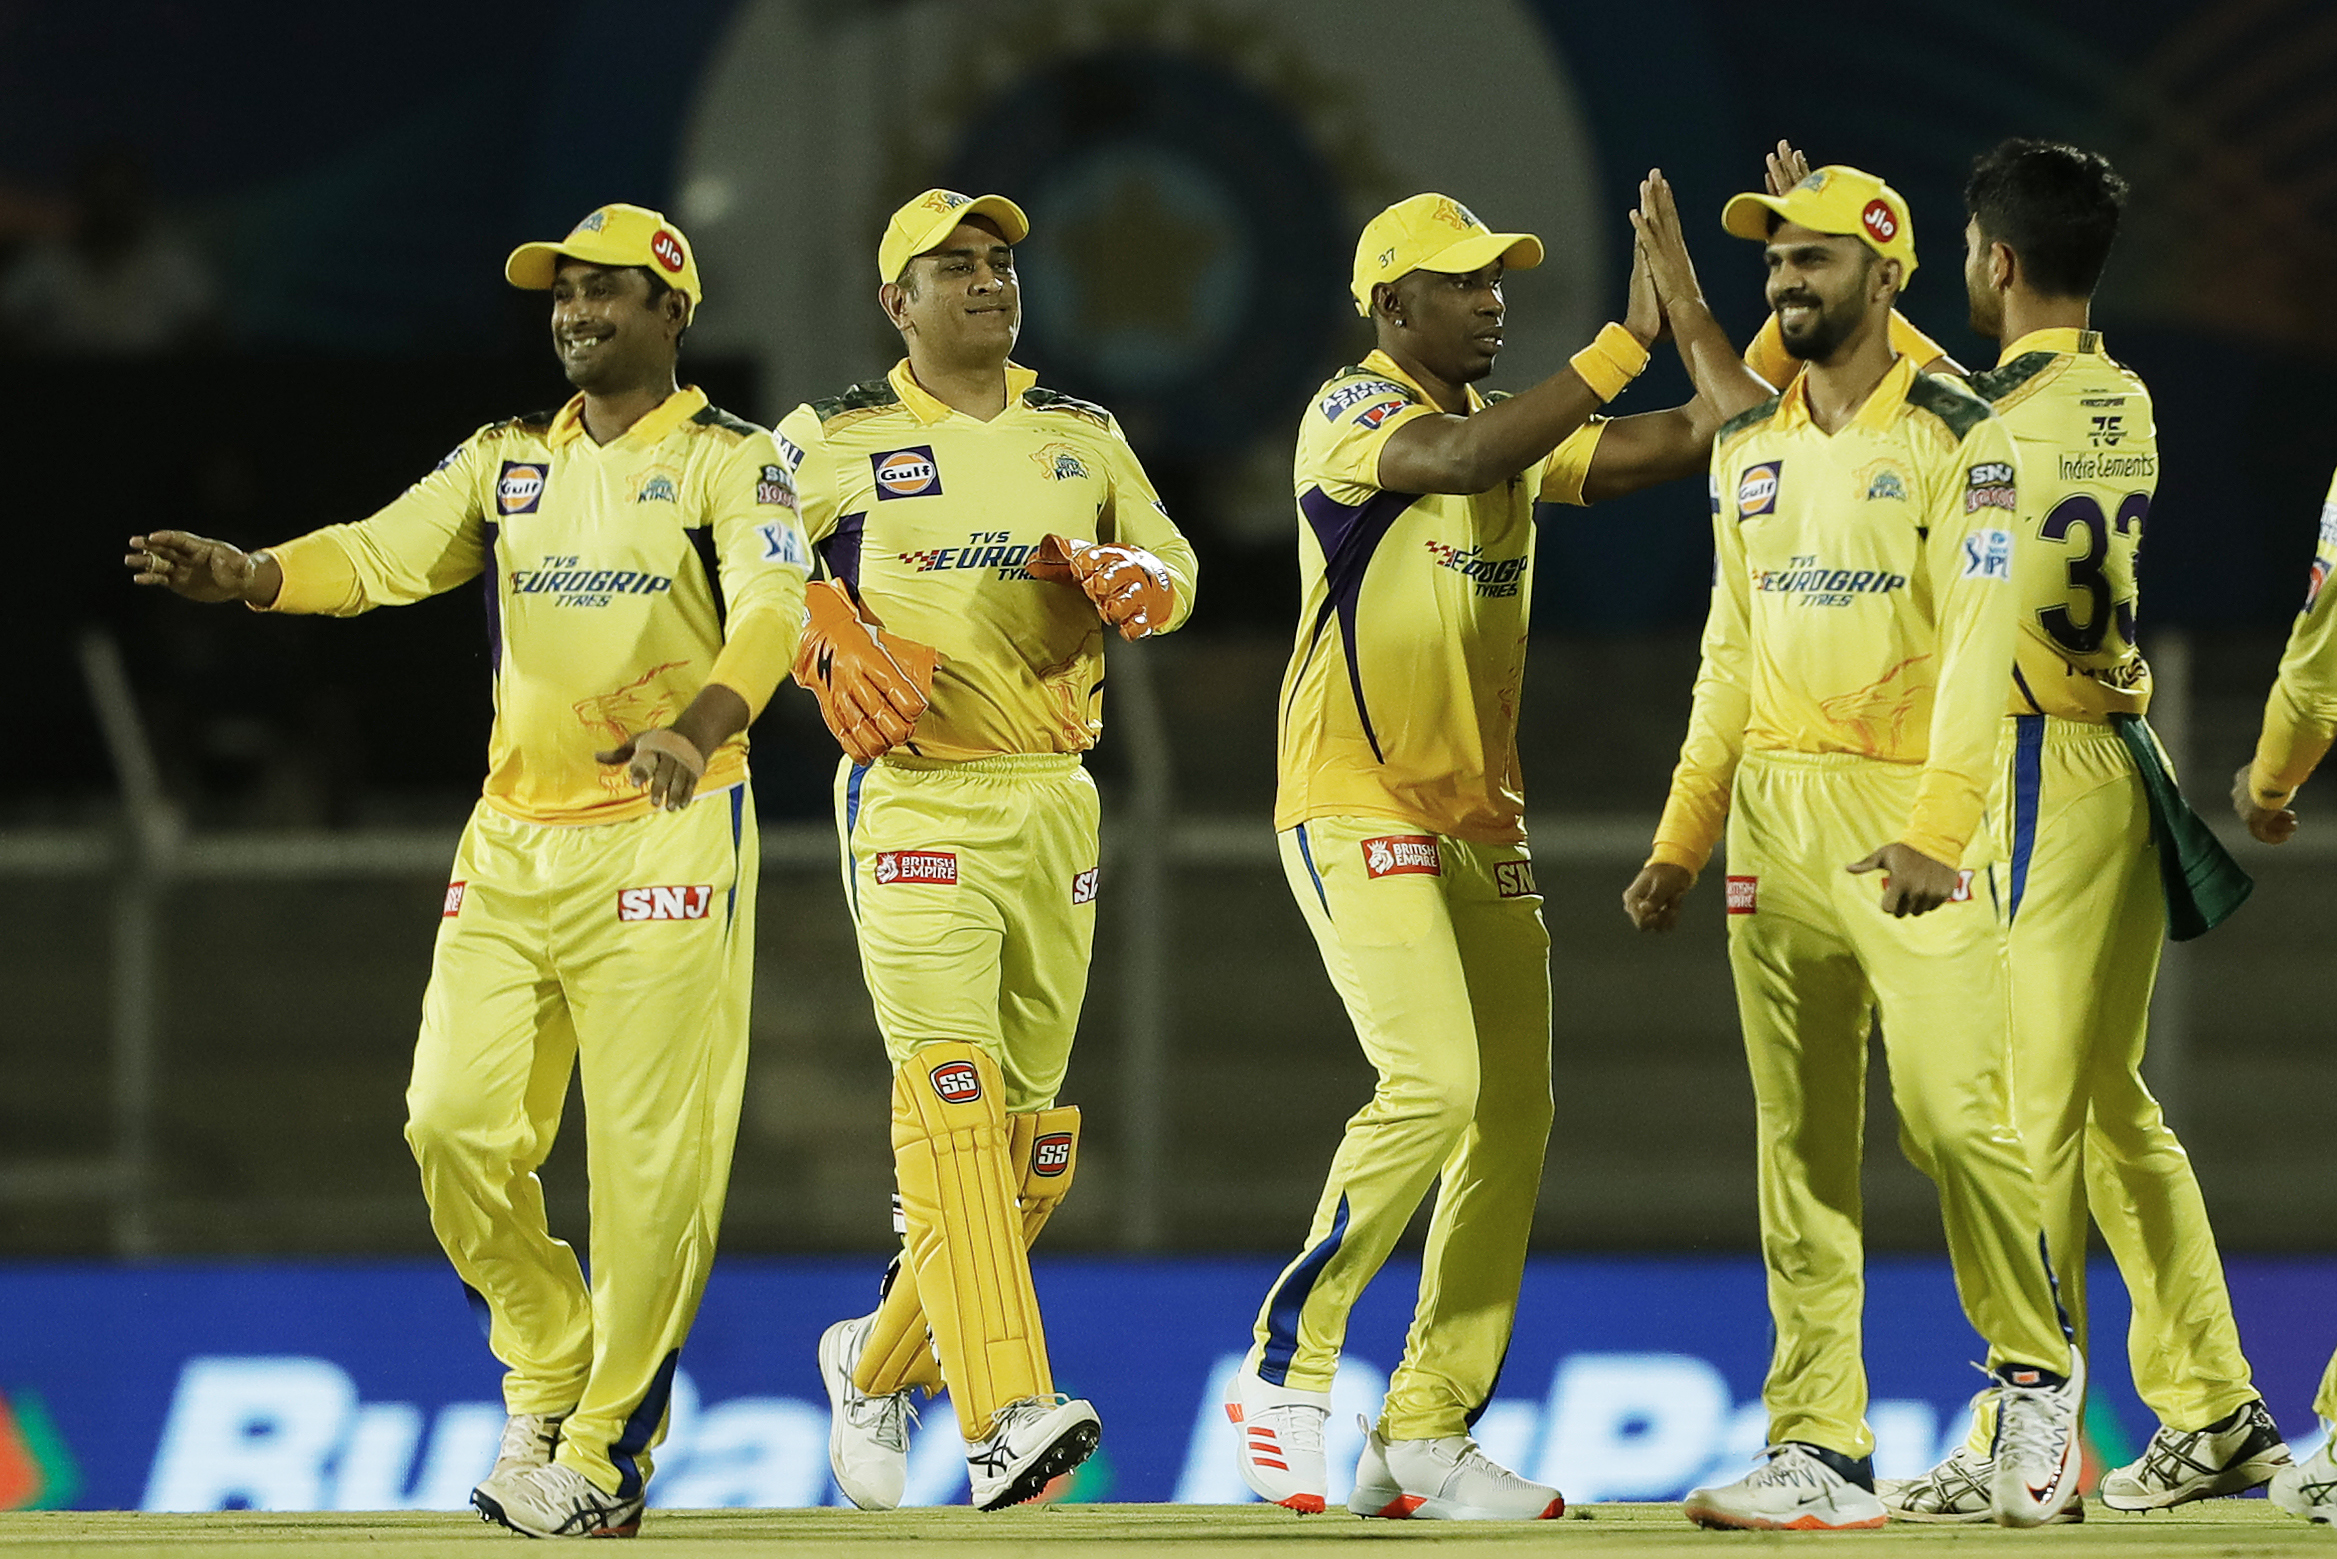 IPL 2022, CSK vs PBKS | Twitter reacts as Broadcaster causes confusion on last ball of Punjab Kings innings against CSK